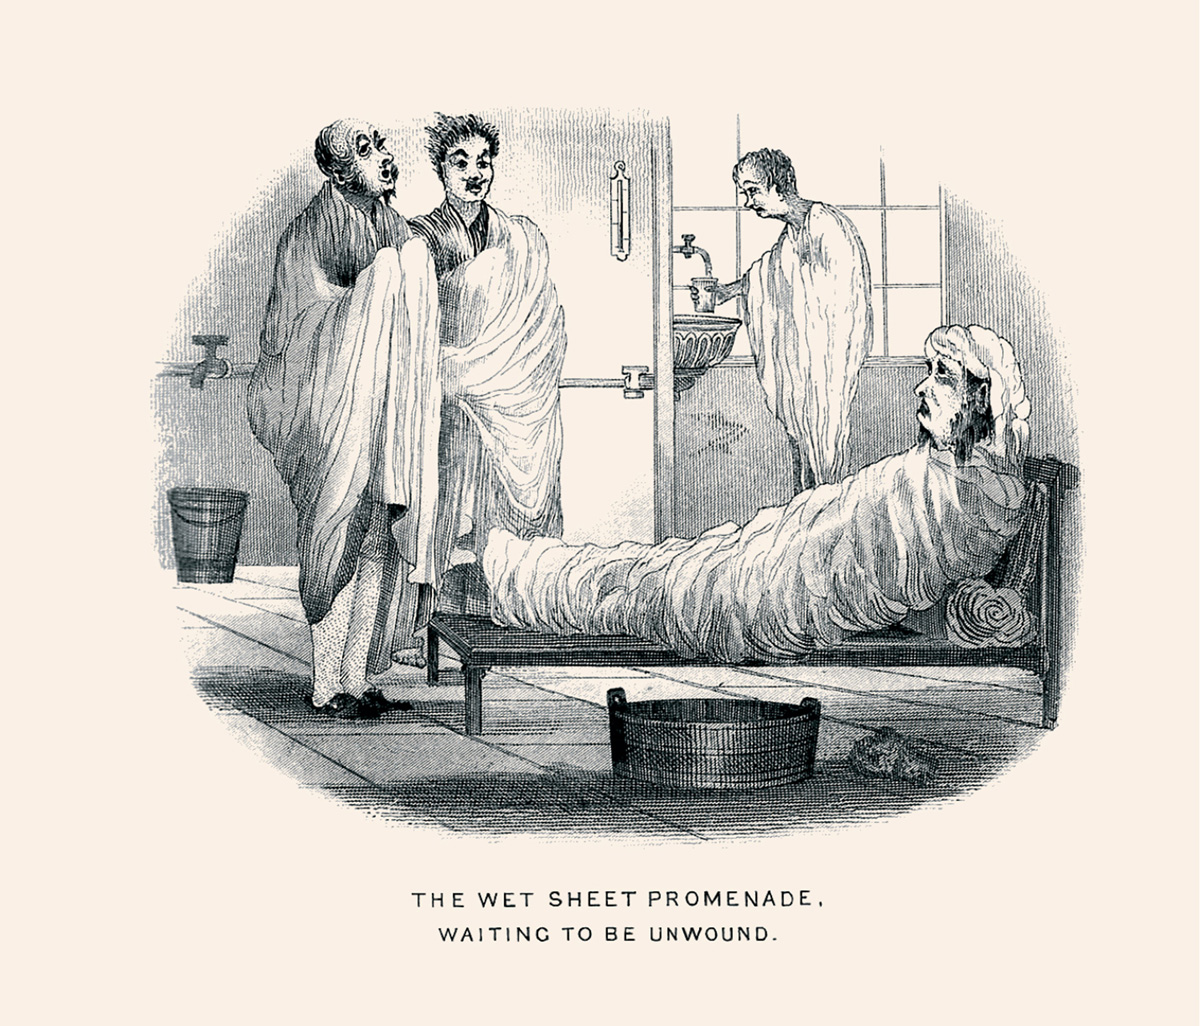 A drawing from the eighteen sixty nine British book “The Water Cure Illustrated of a people wrapped in sheets. The caption reads: “The wet sheet promenade, waiting to be unwound.”